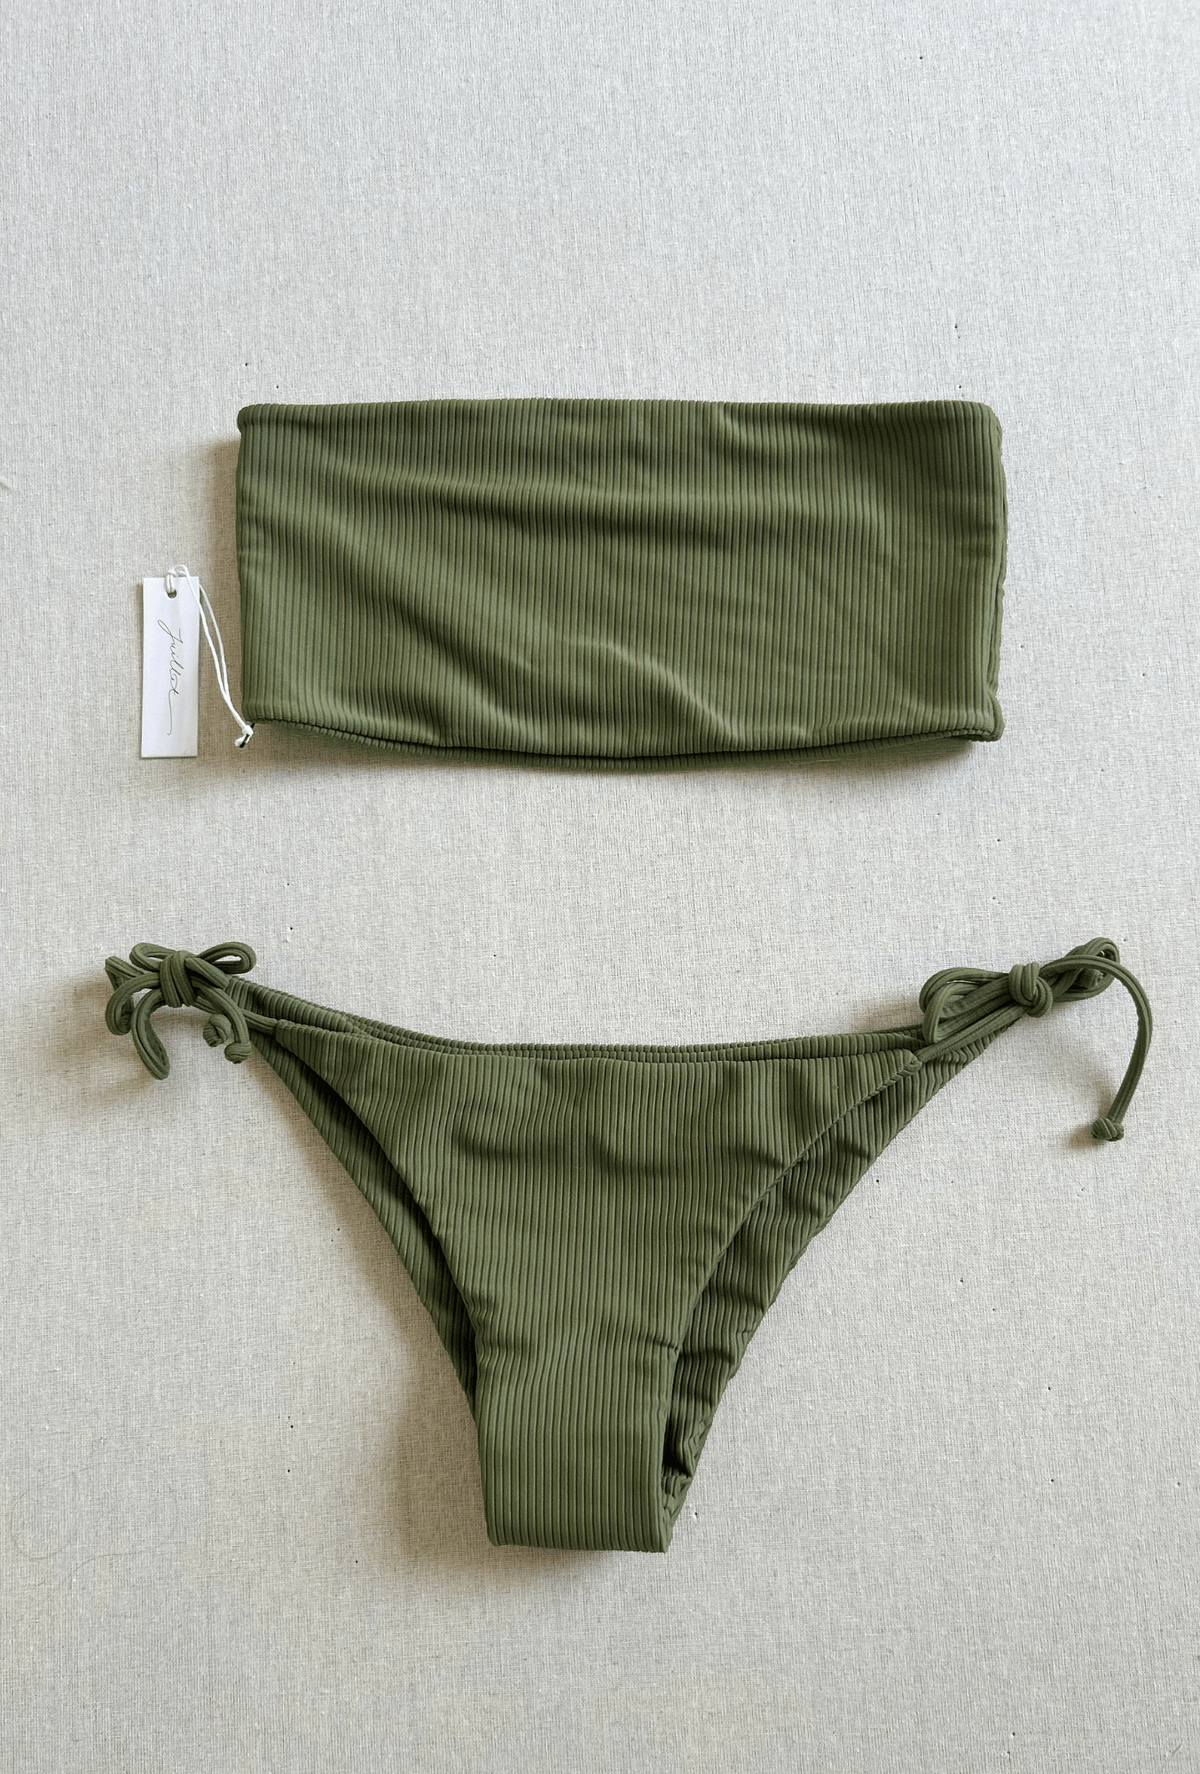 STRAPLESS TOP / TIE BOTTOM IN SAGE RIB - SIZE LARGE